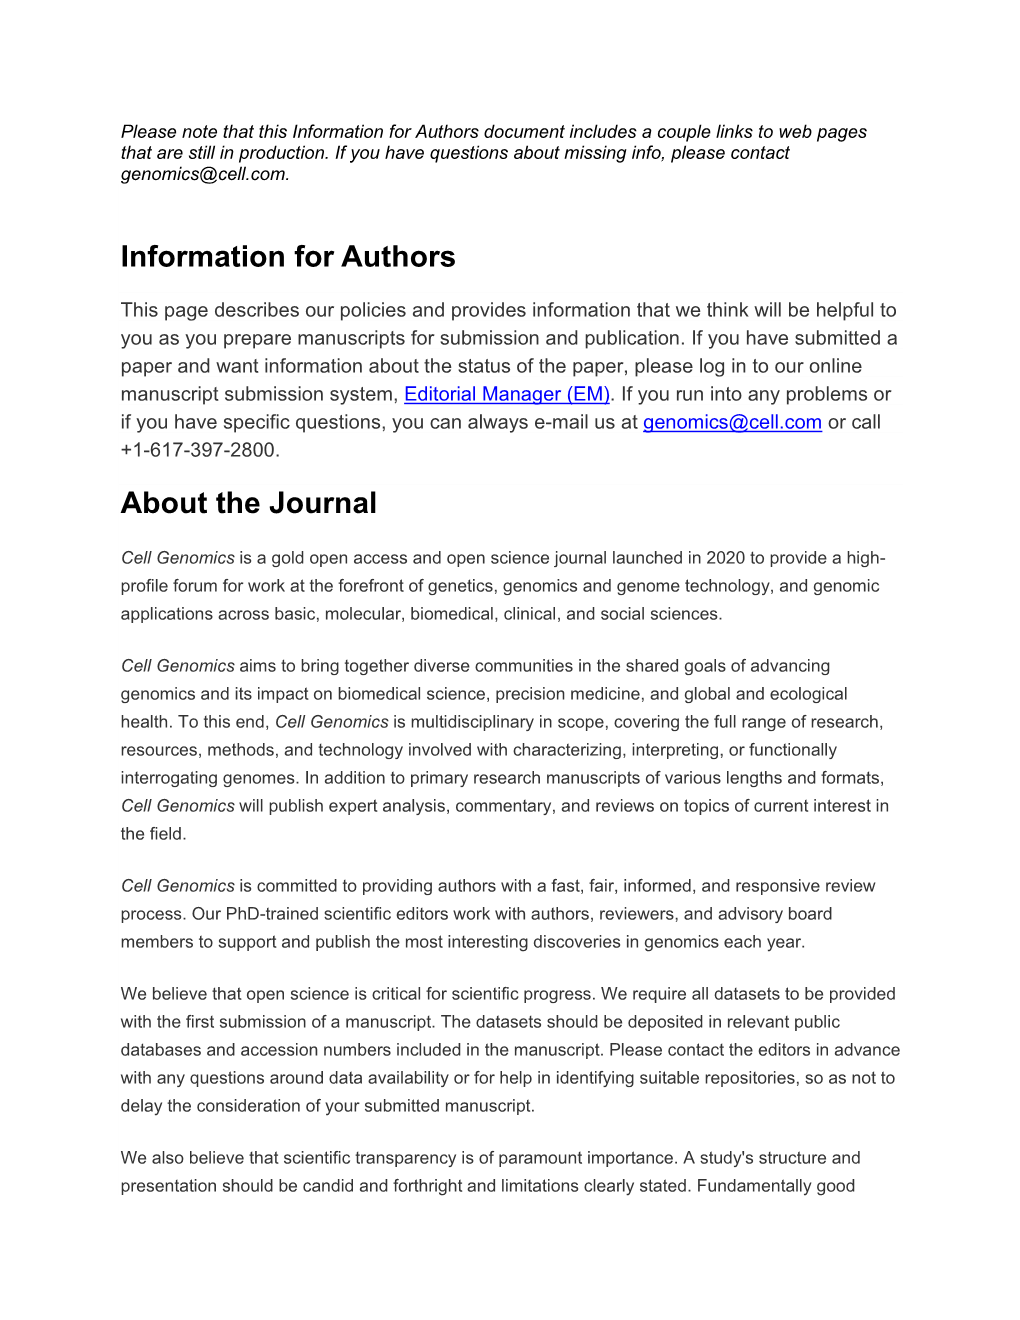 Information for Authors About the Journal